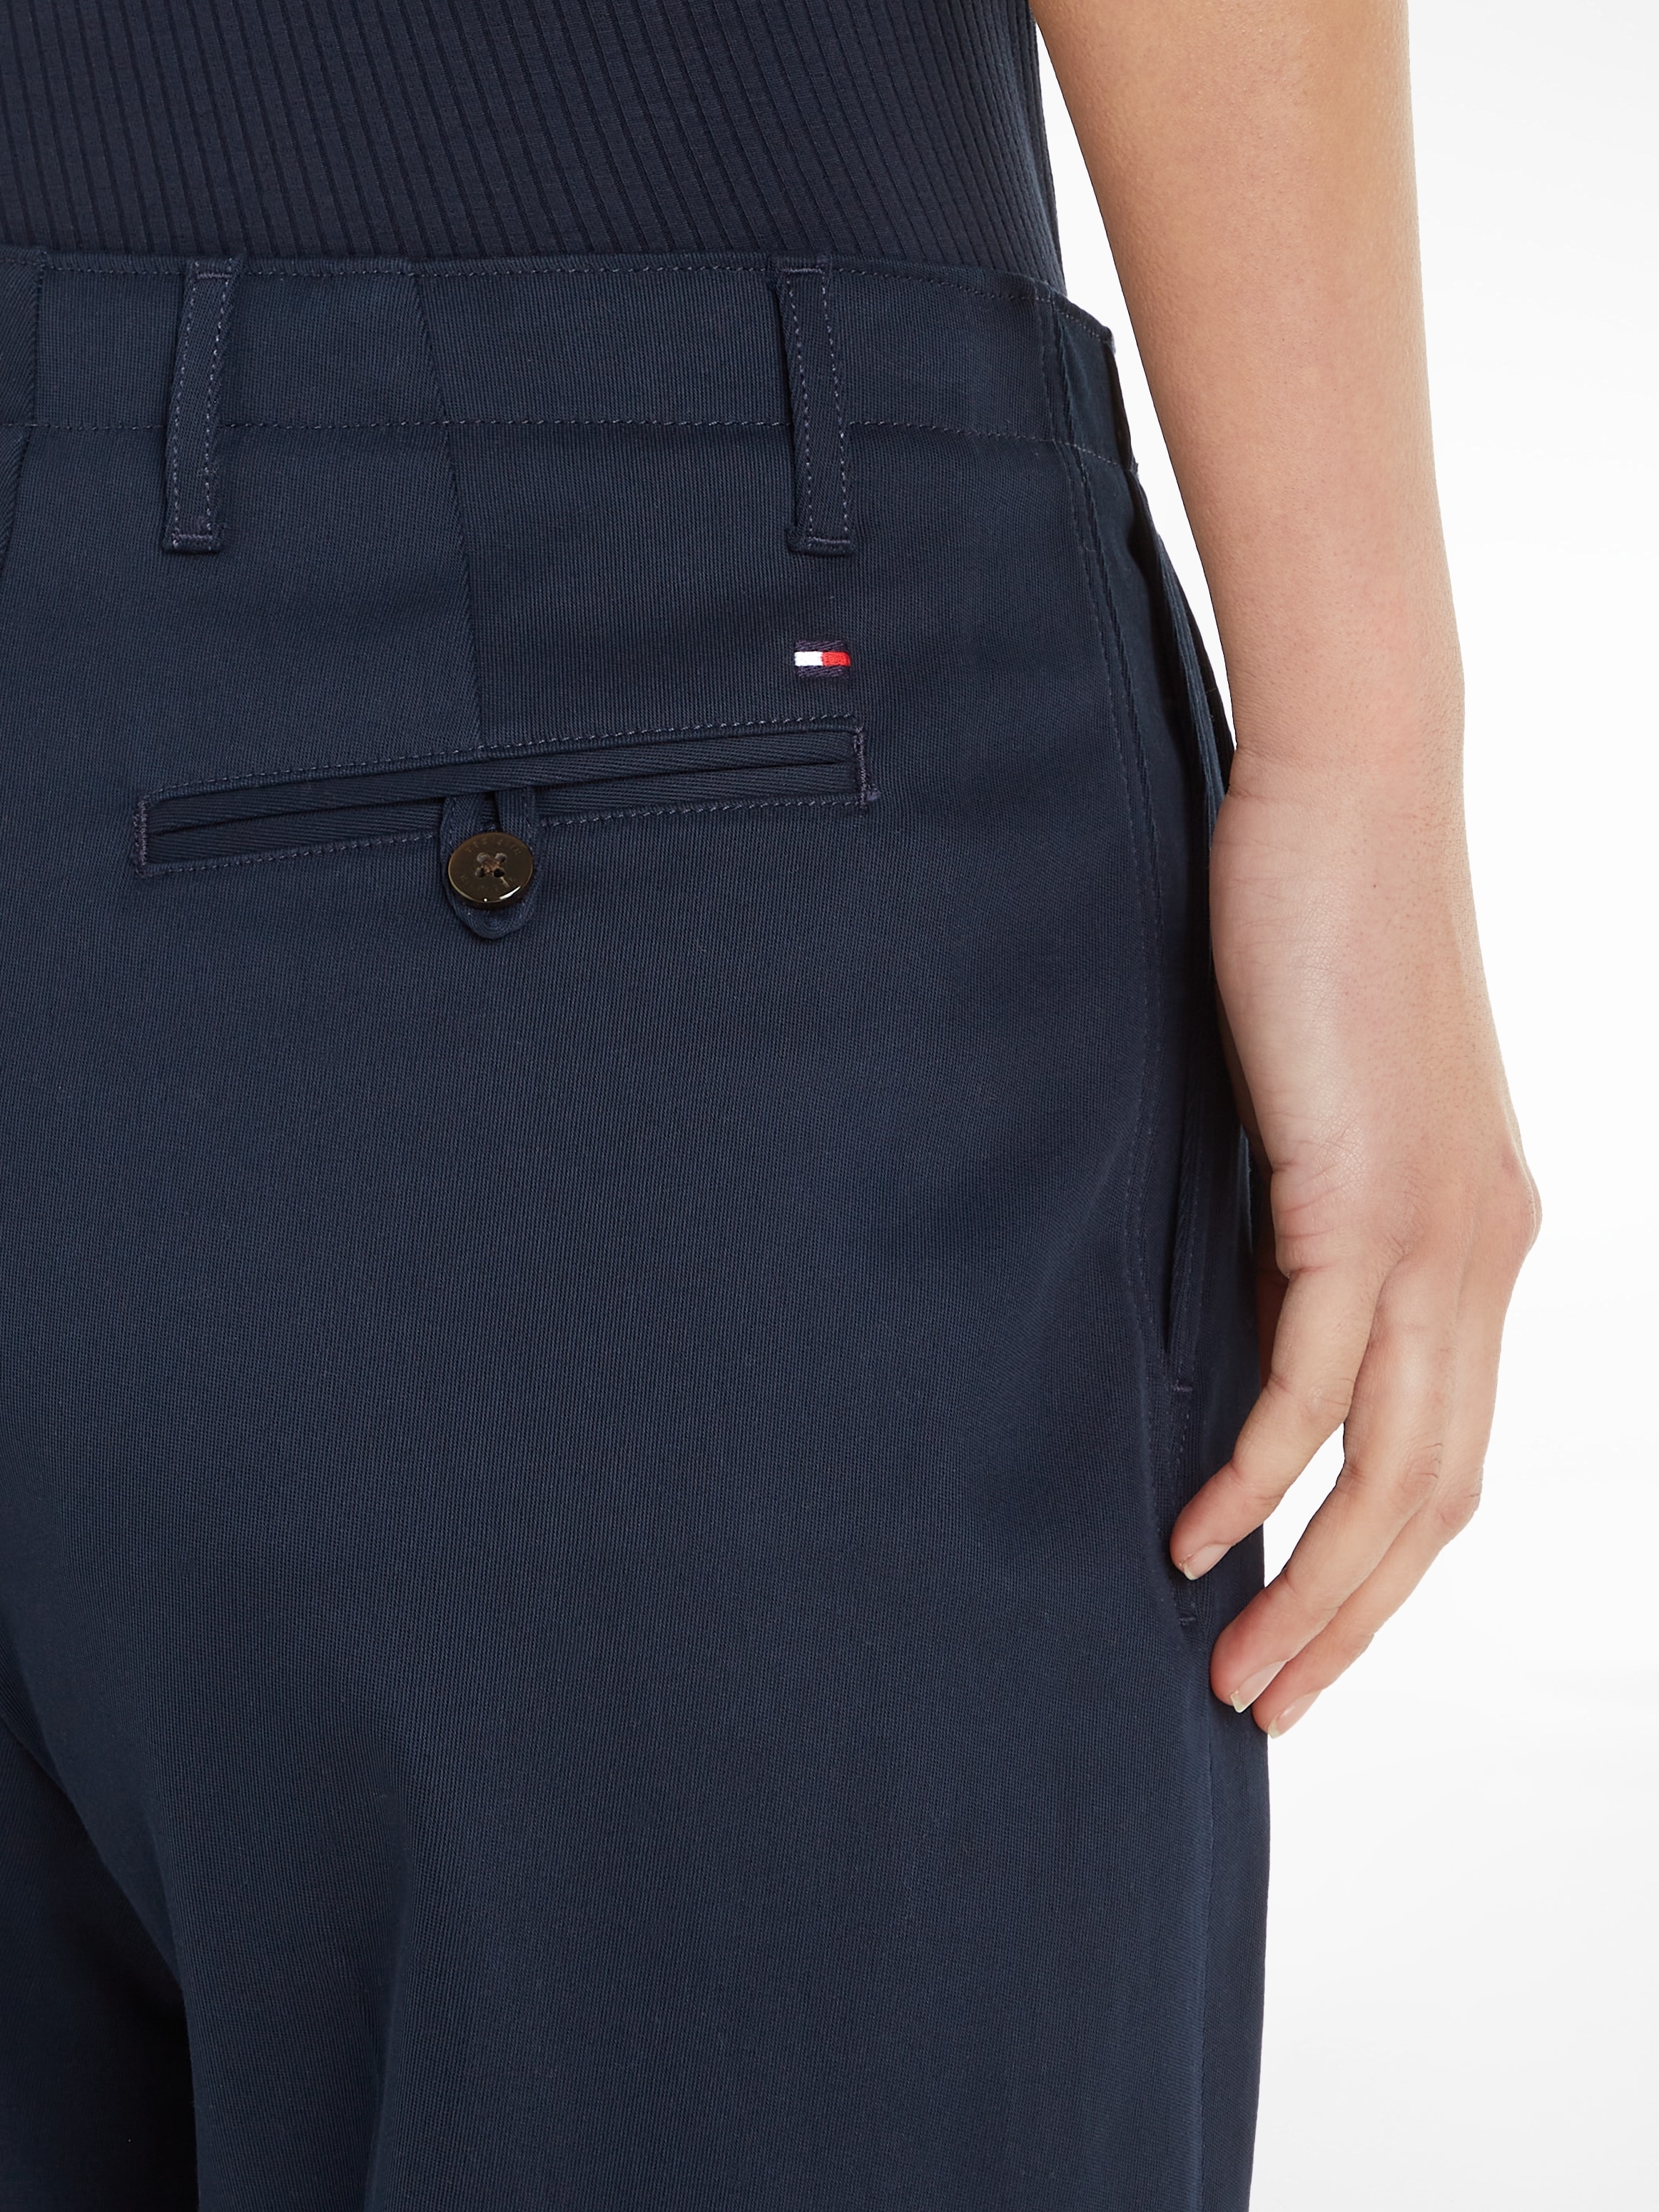 Tommy Hilfiger Chinohose »RELAXED STRAIGHT CHINO PANT«, mit Logostickerei